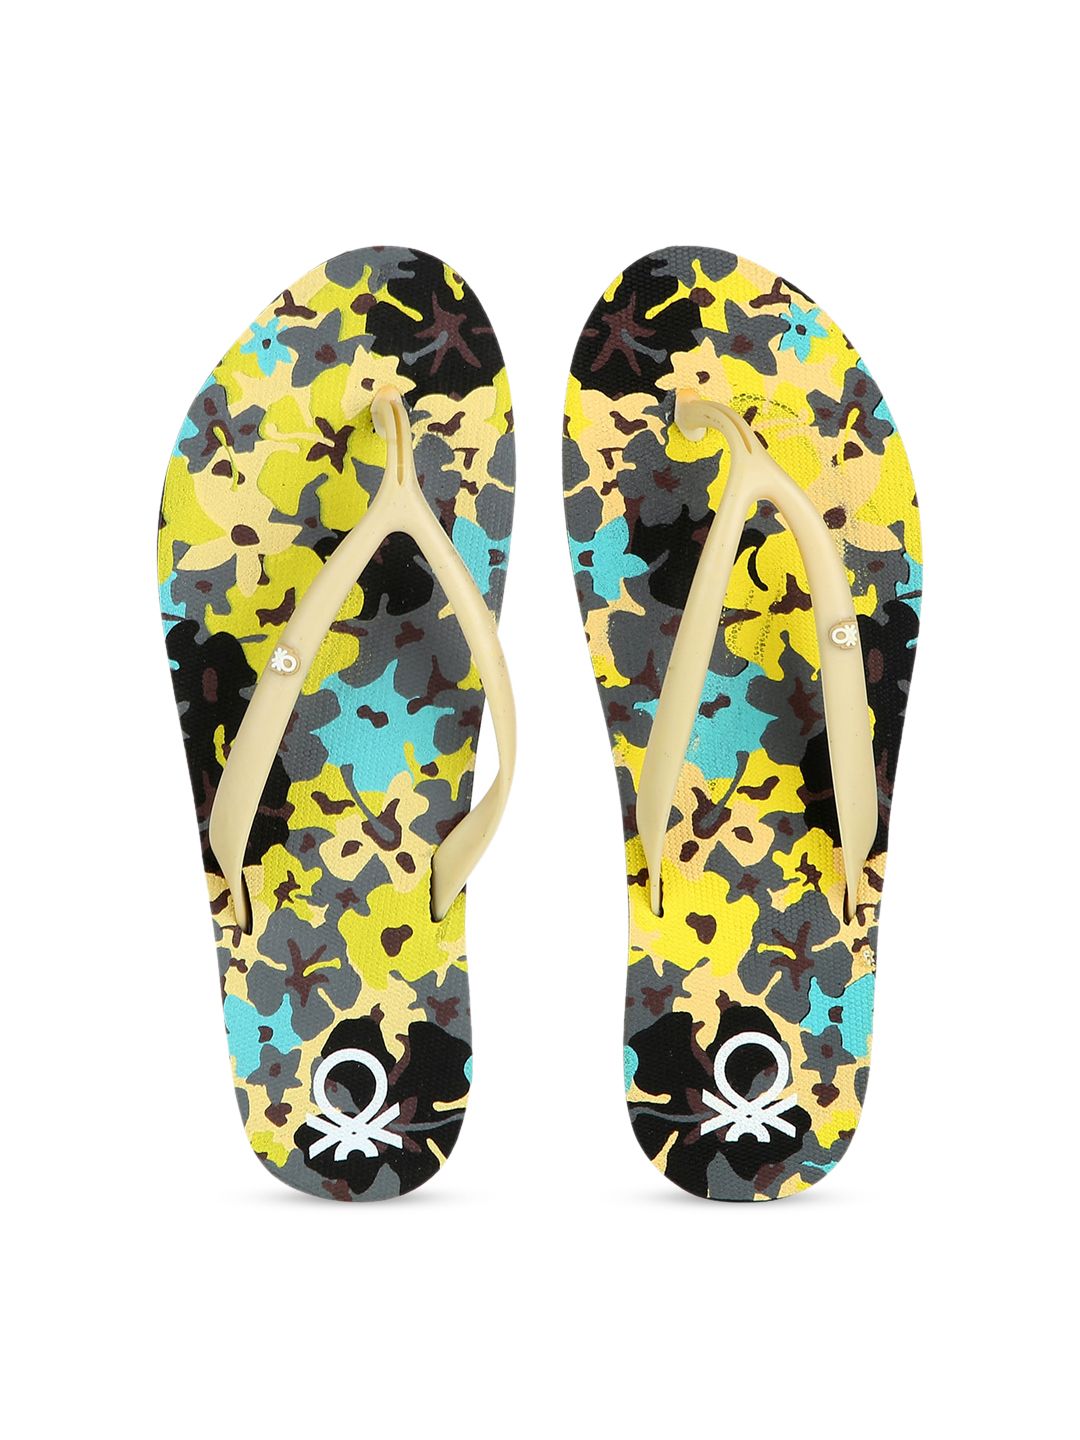 United Colors of Benetton Women Multicoloured Printed Thong Flip-Flops Price in India